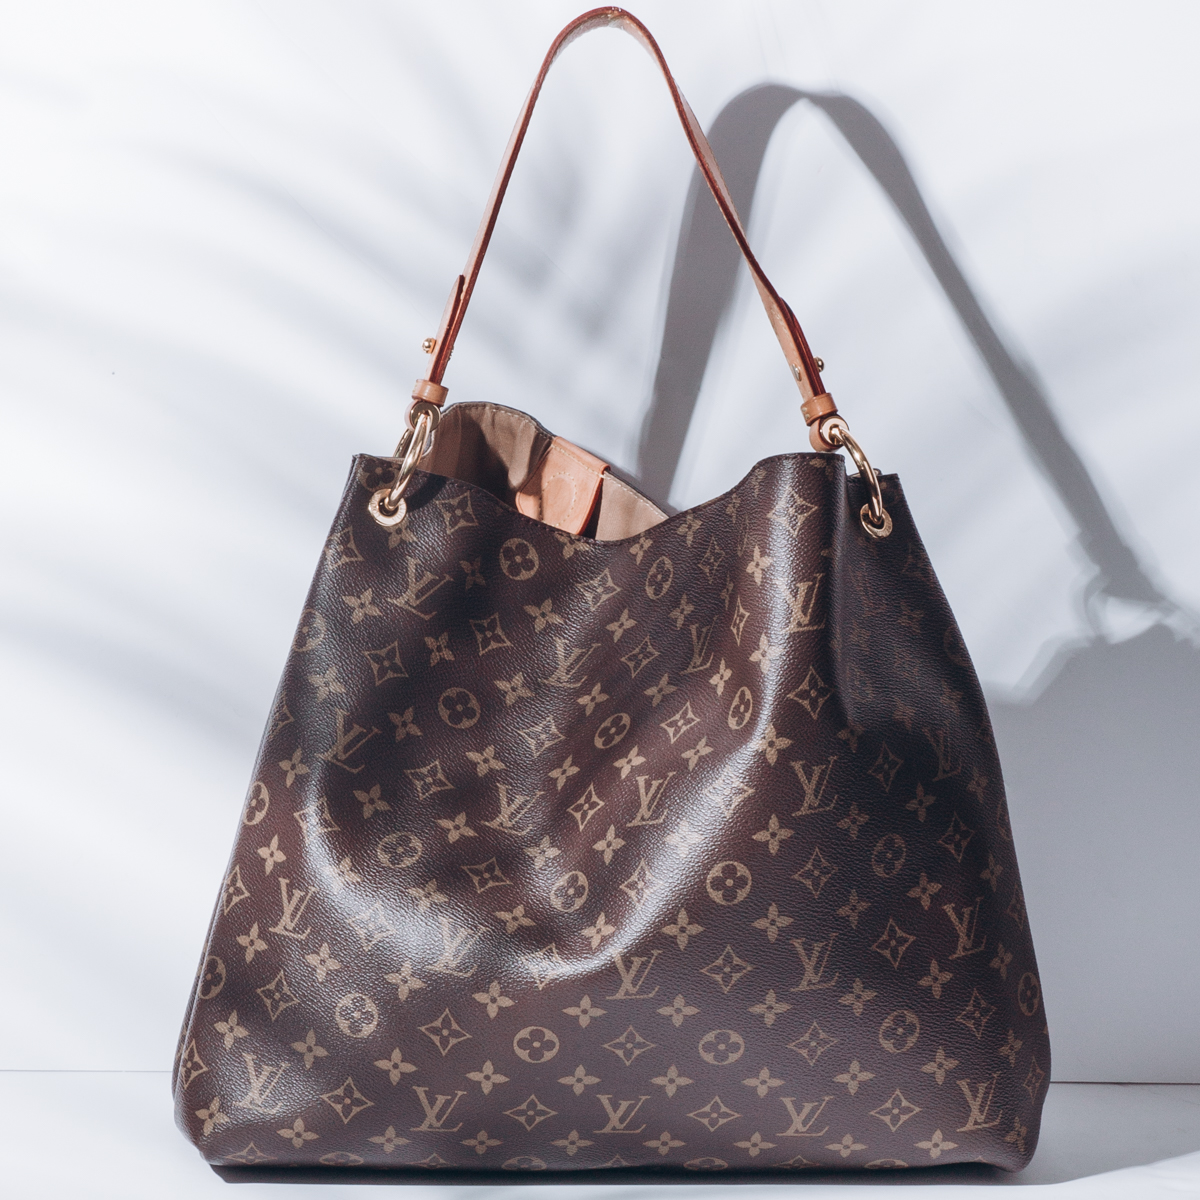 Discounted Louis Vuitton bags do exist: Here's how to find one